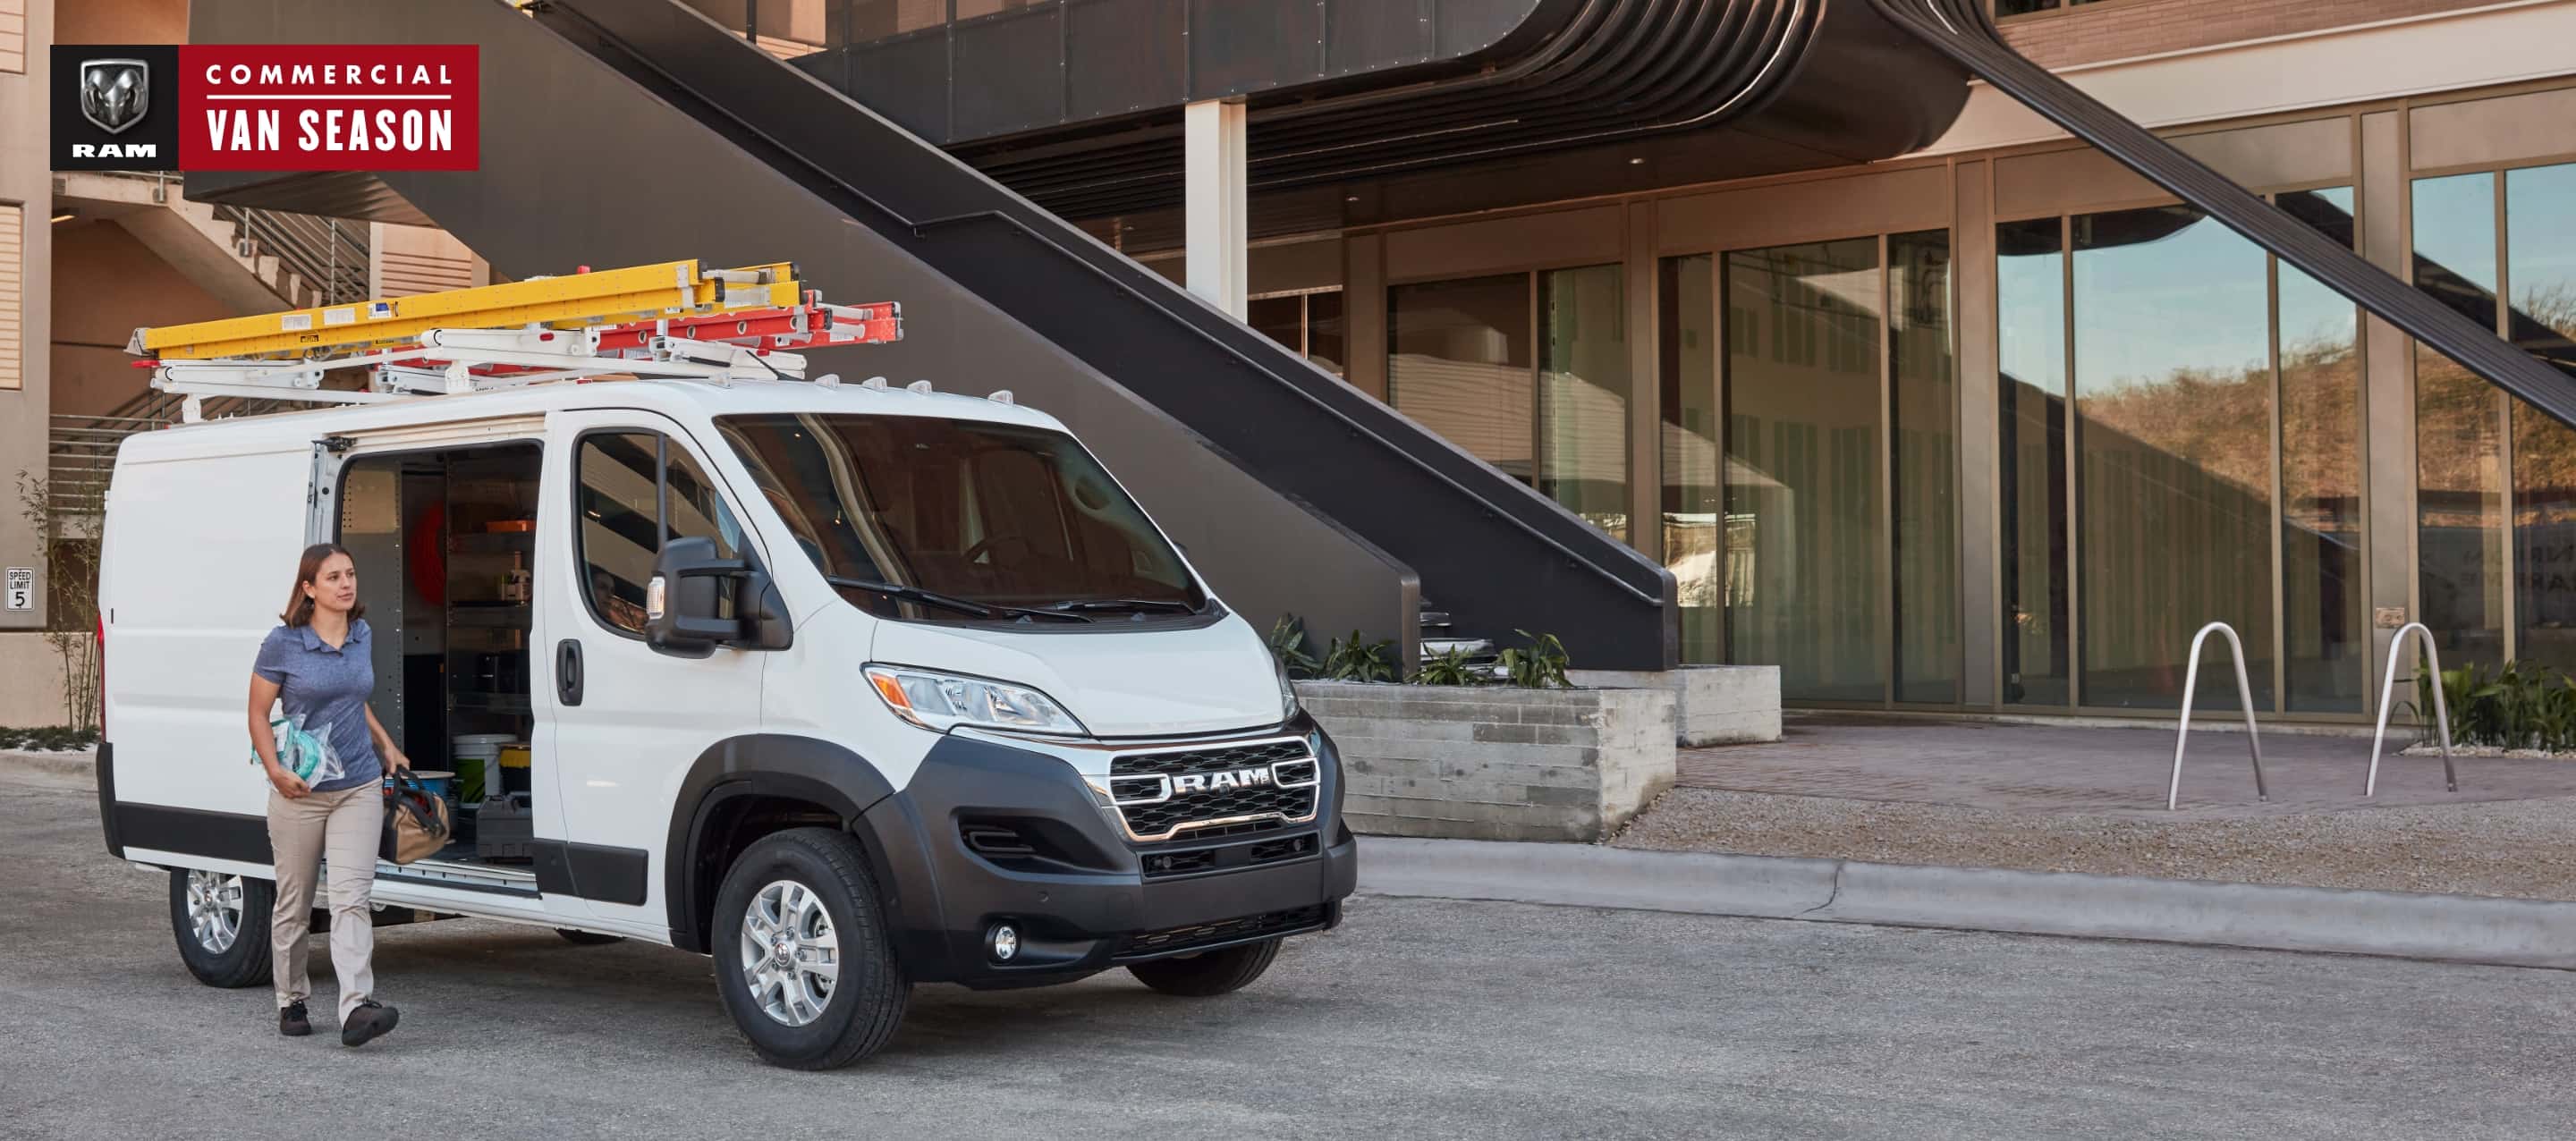  A 2023 Ram ProMaster Low Roof Cargo Van with ladders attached to its roof rack, parked beside a commercial building with its side door open and a woman carrying tools outside the vehicle. Ram Commercial Van Season.